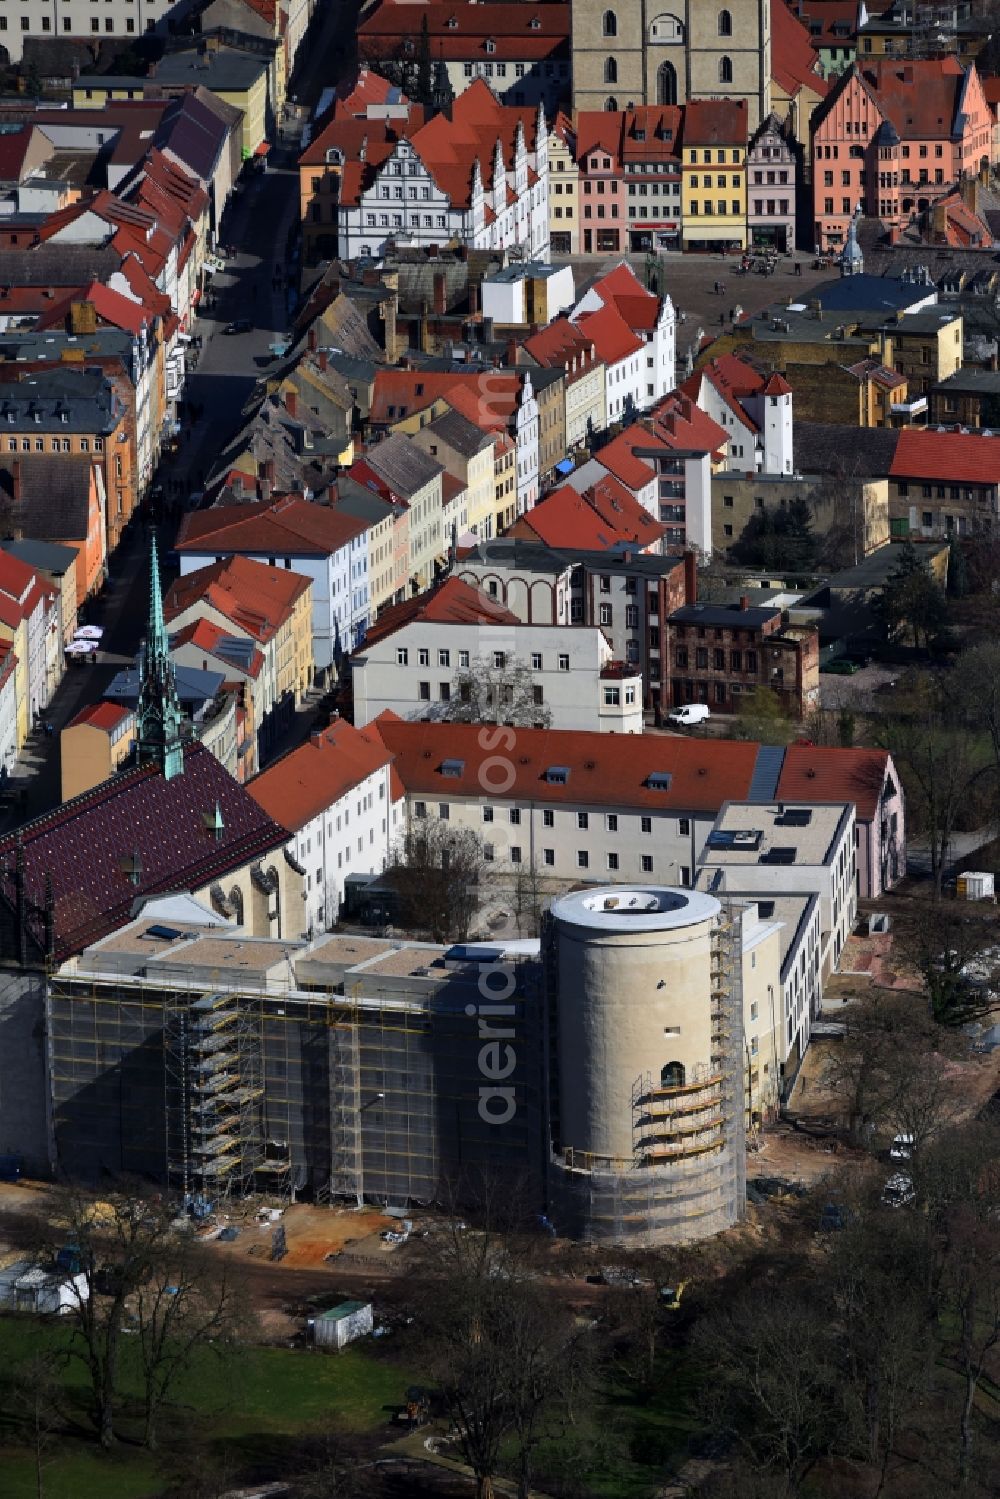 Lutherstadt Wittenberg from the bird's eye view: Castle church of Wittenberg. The castle with its 88 m high Gothic tower at the west end of the town is a UNESCO World Heritage Site. It gained fame as the Wittenberg Augustinian monk and theology professor Martin Luther spread his disputation